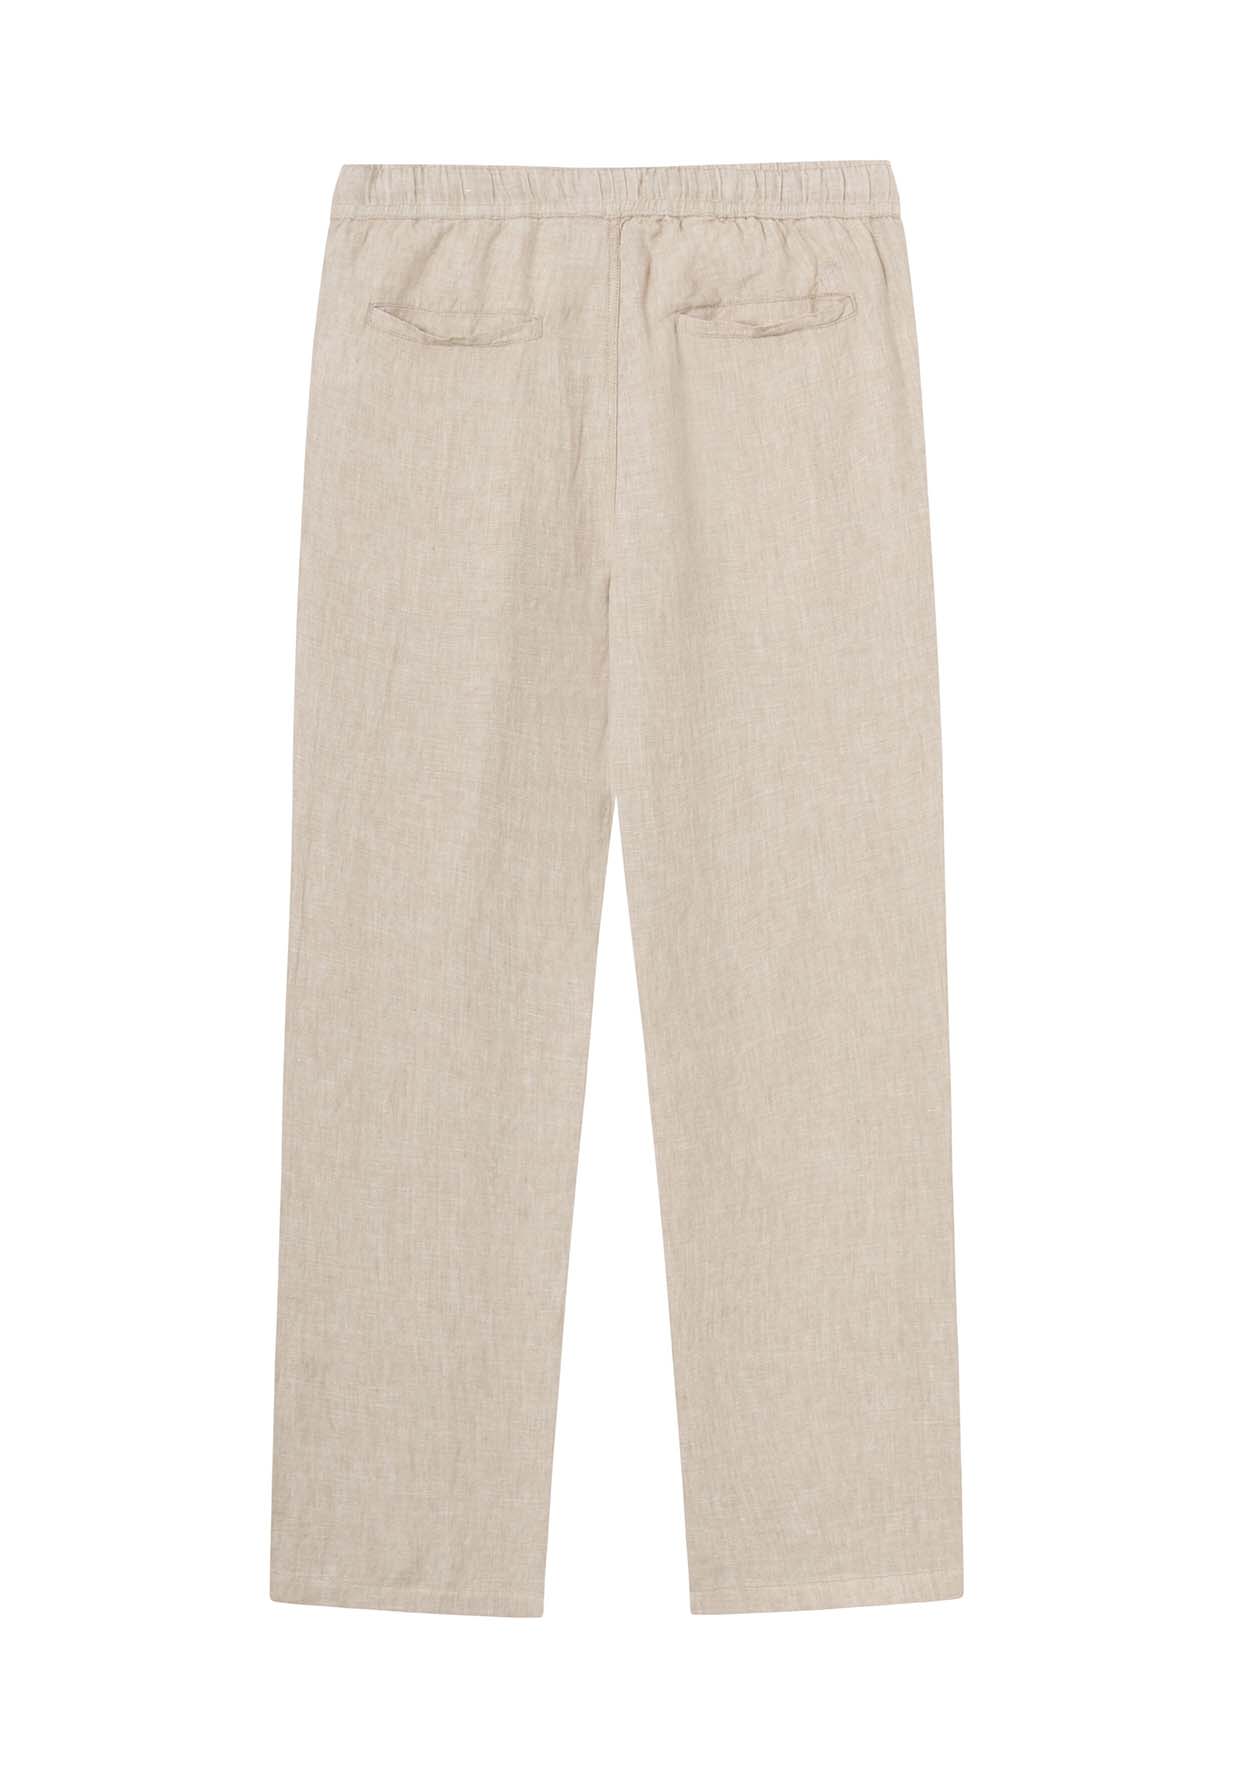 KNOWLEDGECOTTON APPAREL Loose Linen Pant light feather gray M